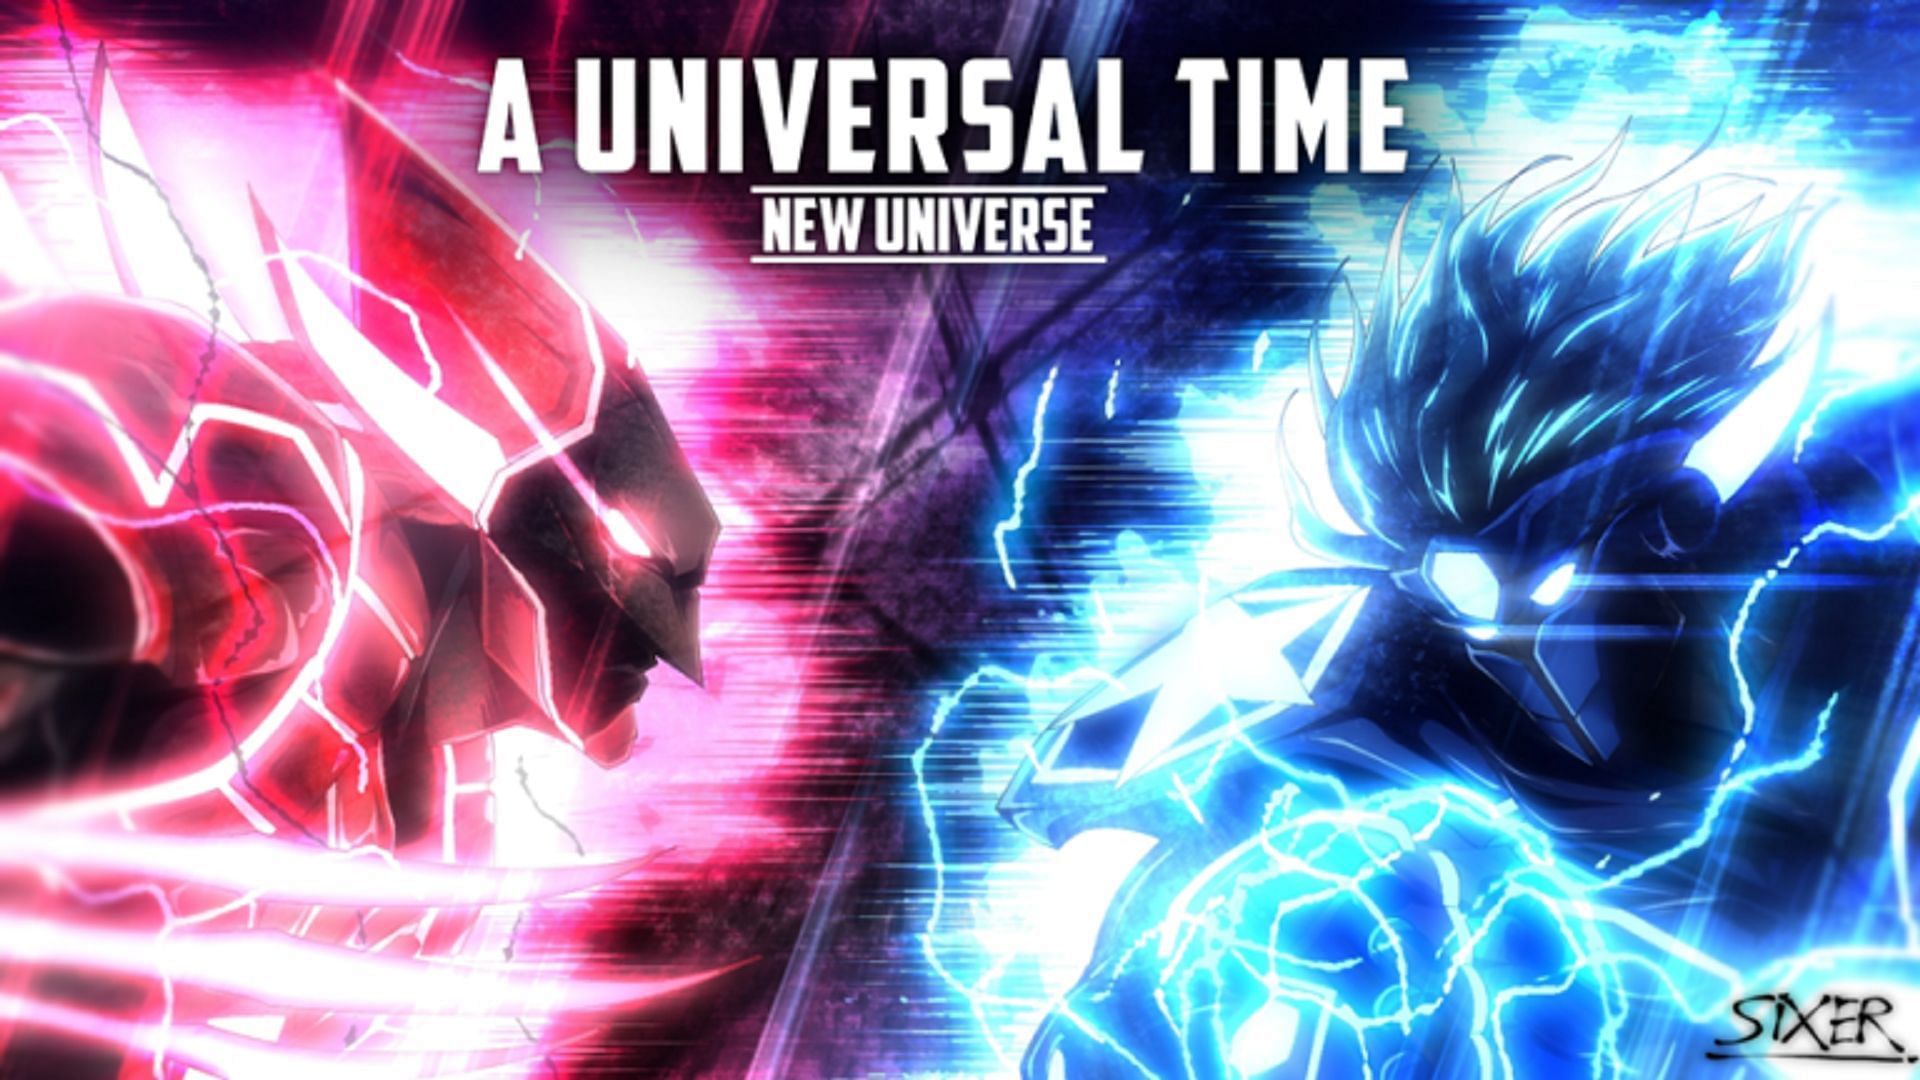 One of several featured images for A Universal Time (Image via Roblox)